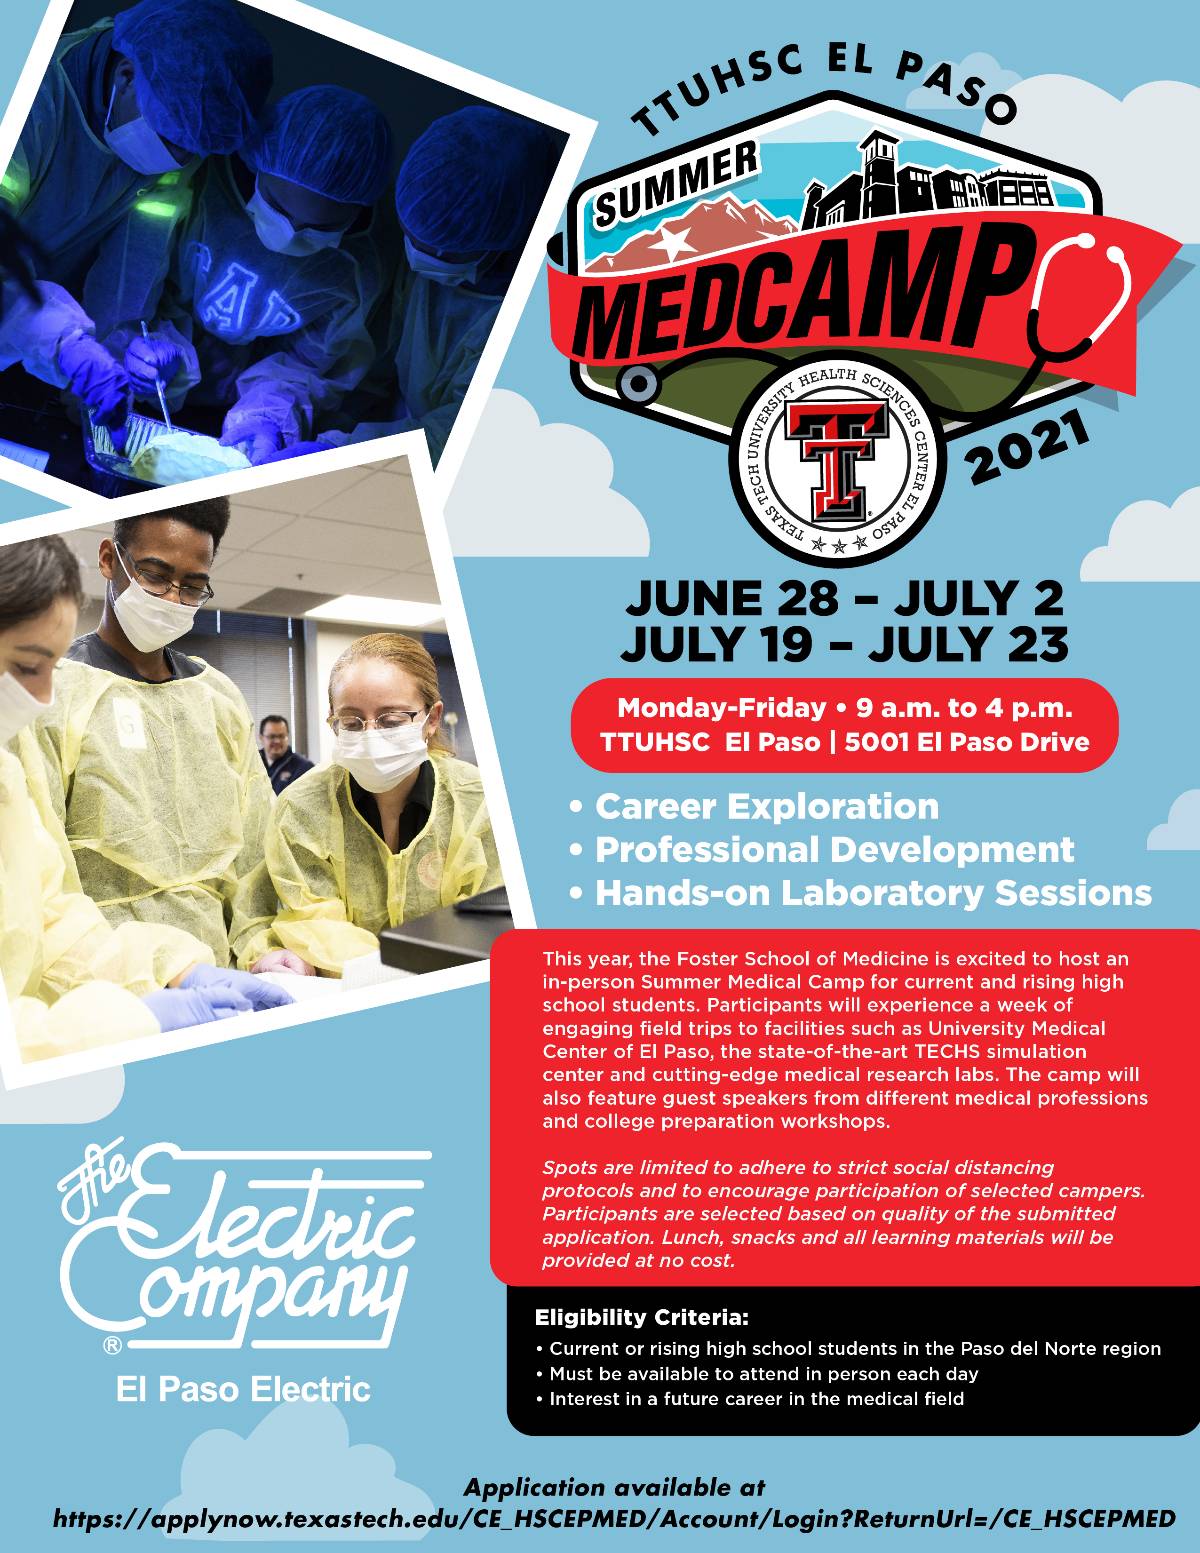 Thmbnail image for the 2021 High School Med Camp